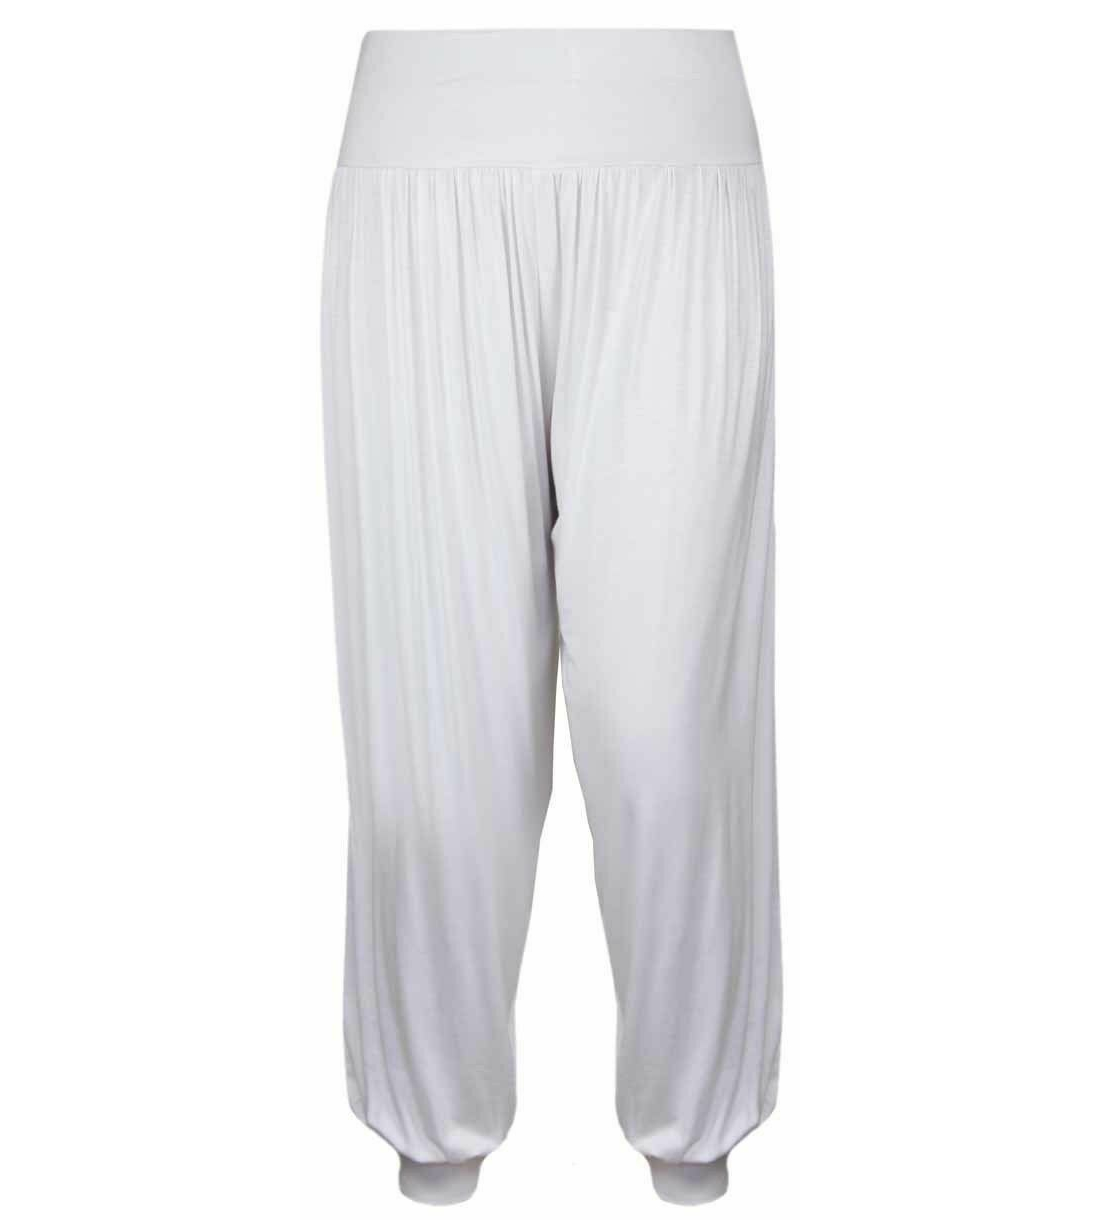 Kids Childrens Girls Dance Wear Harem Ali Baba Baggy Pants Trousers in Ages 7-8 11-12 & 13 9-10 